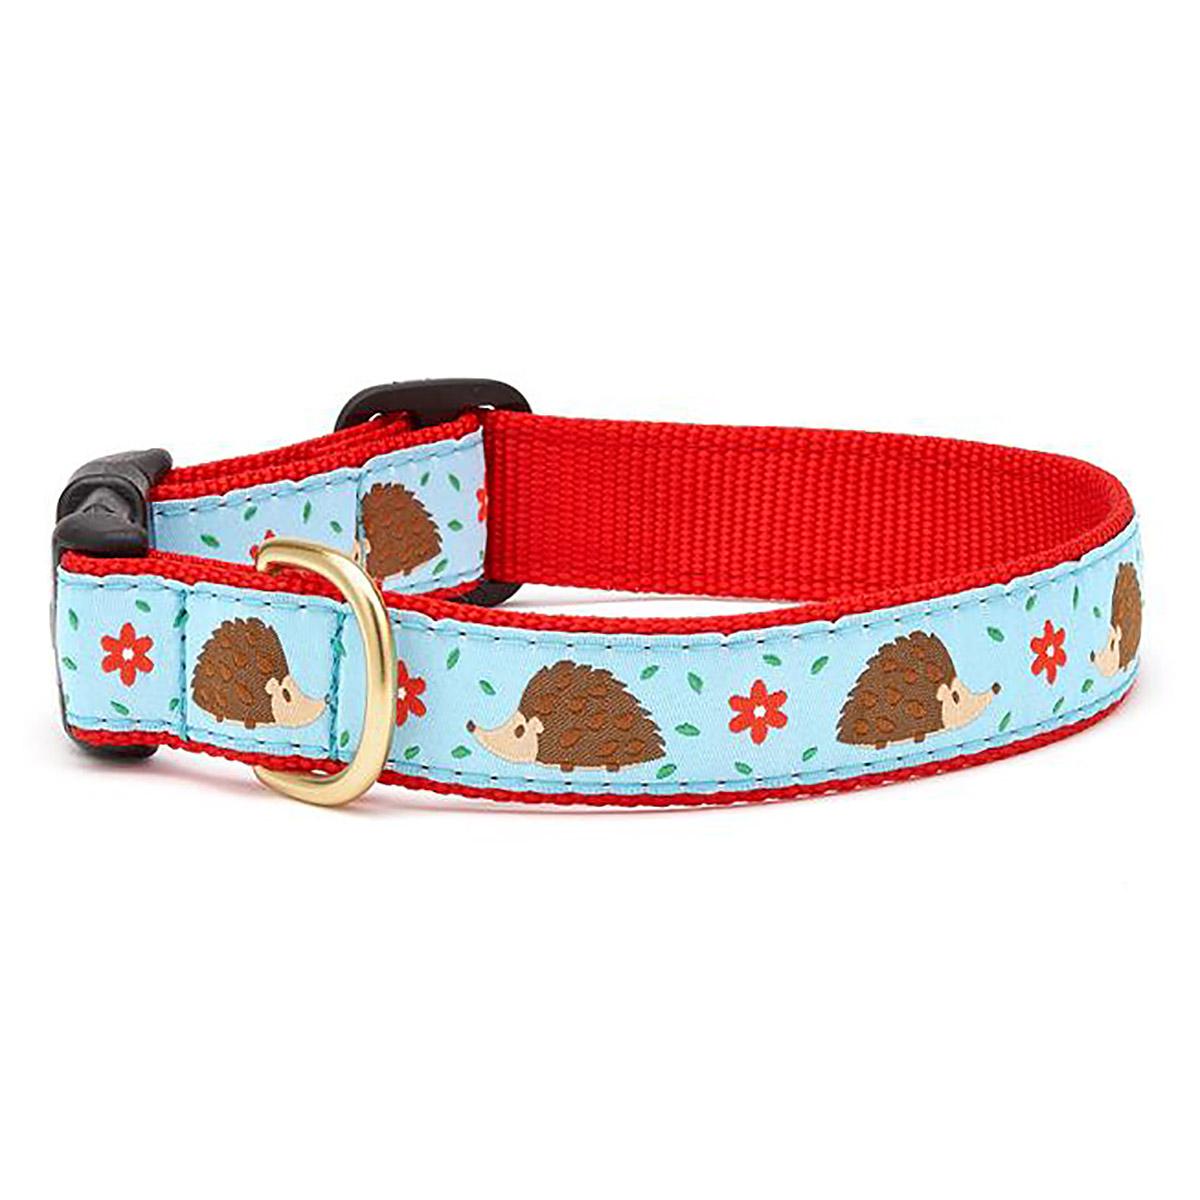 Hedgehog Dog Collar by Up Country